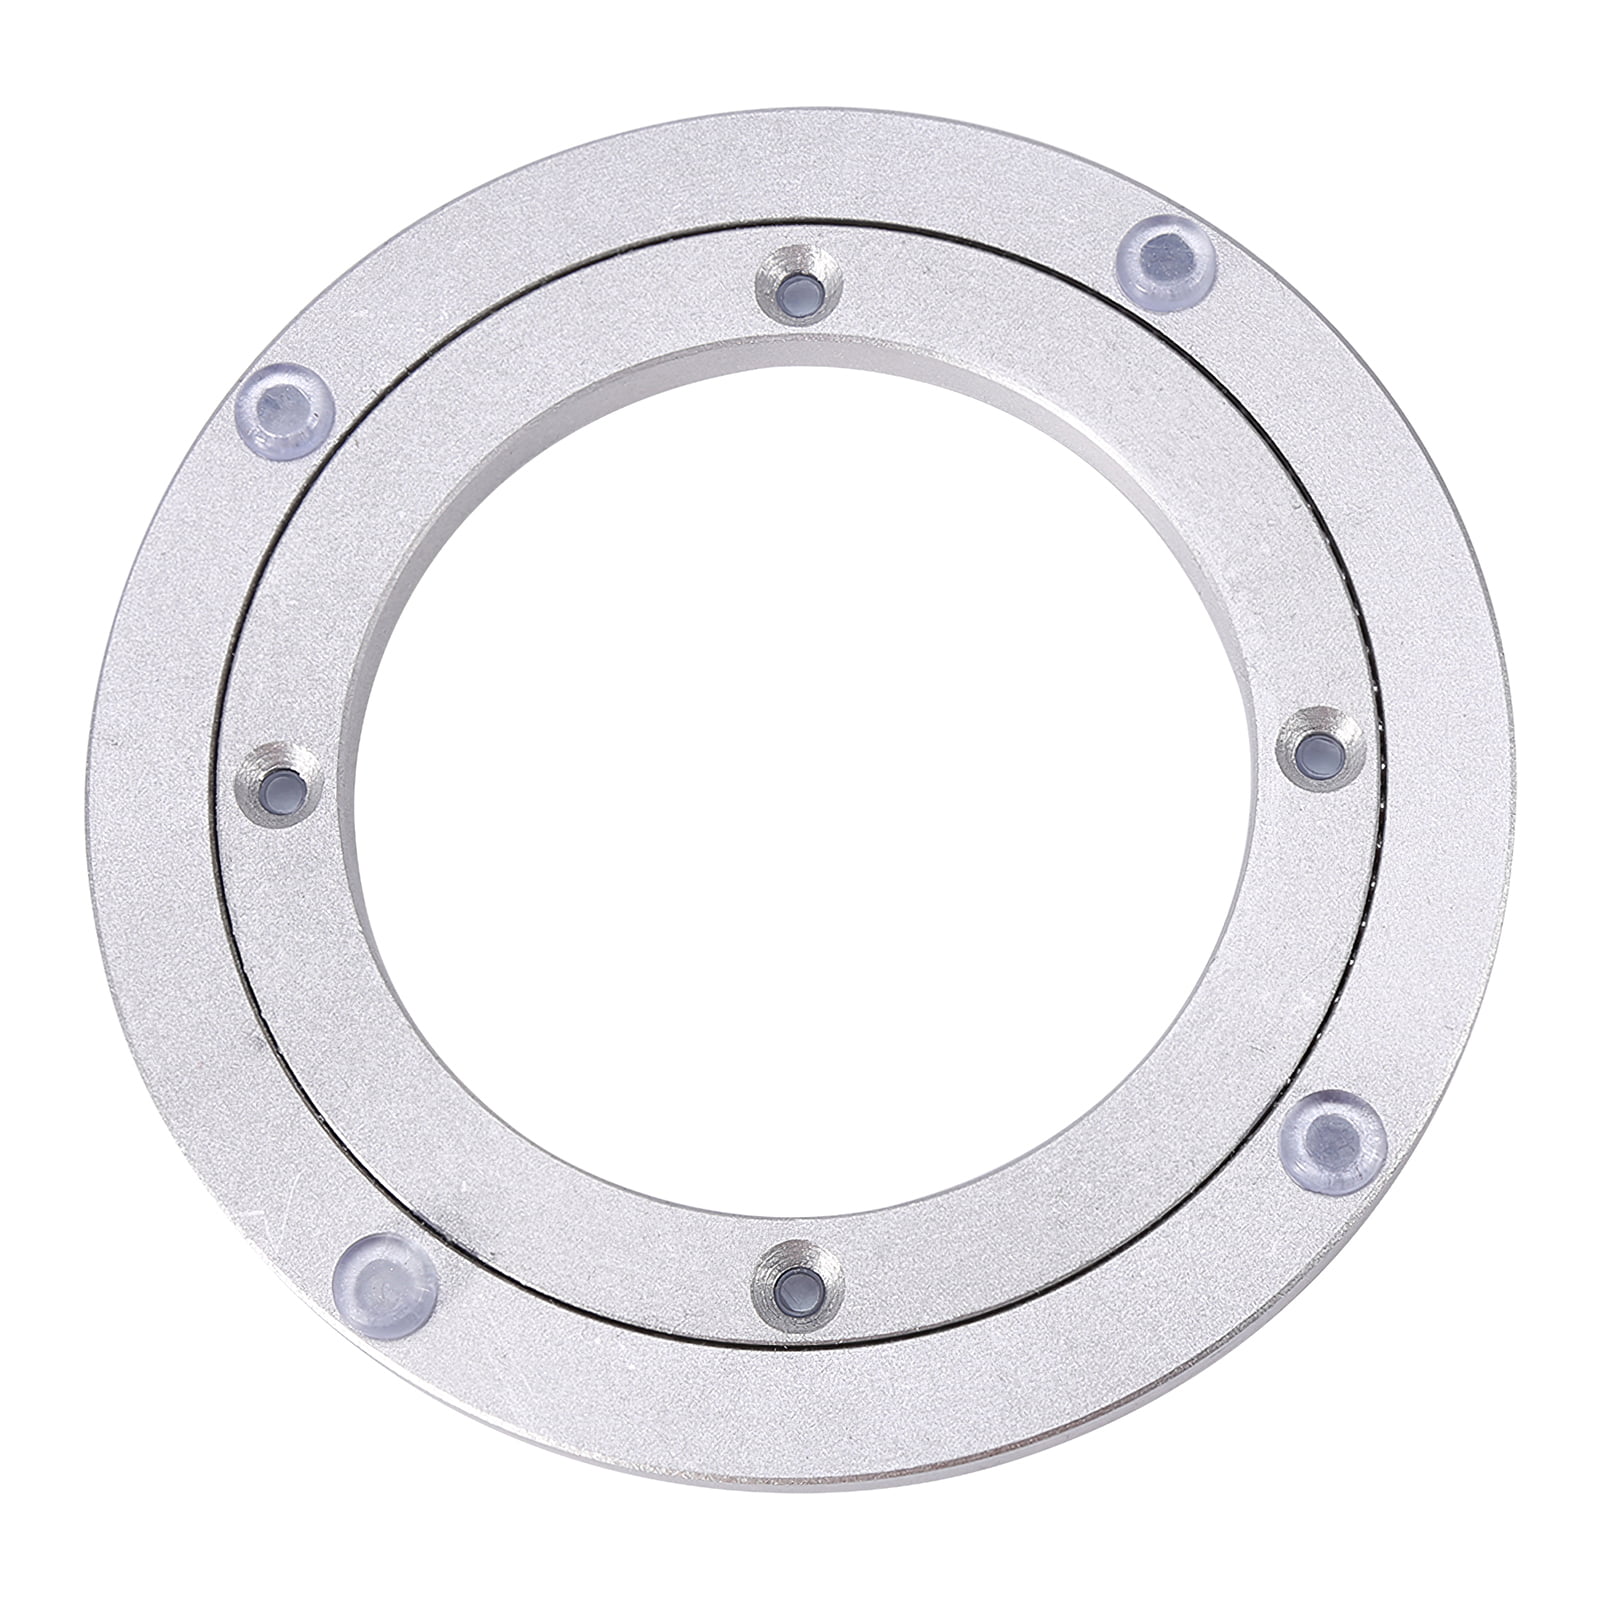 Aluminum Alloy Dining Table Round Rotating Plate Turntable For Lazy Susan Bearin 